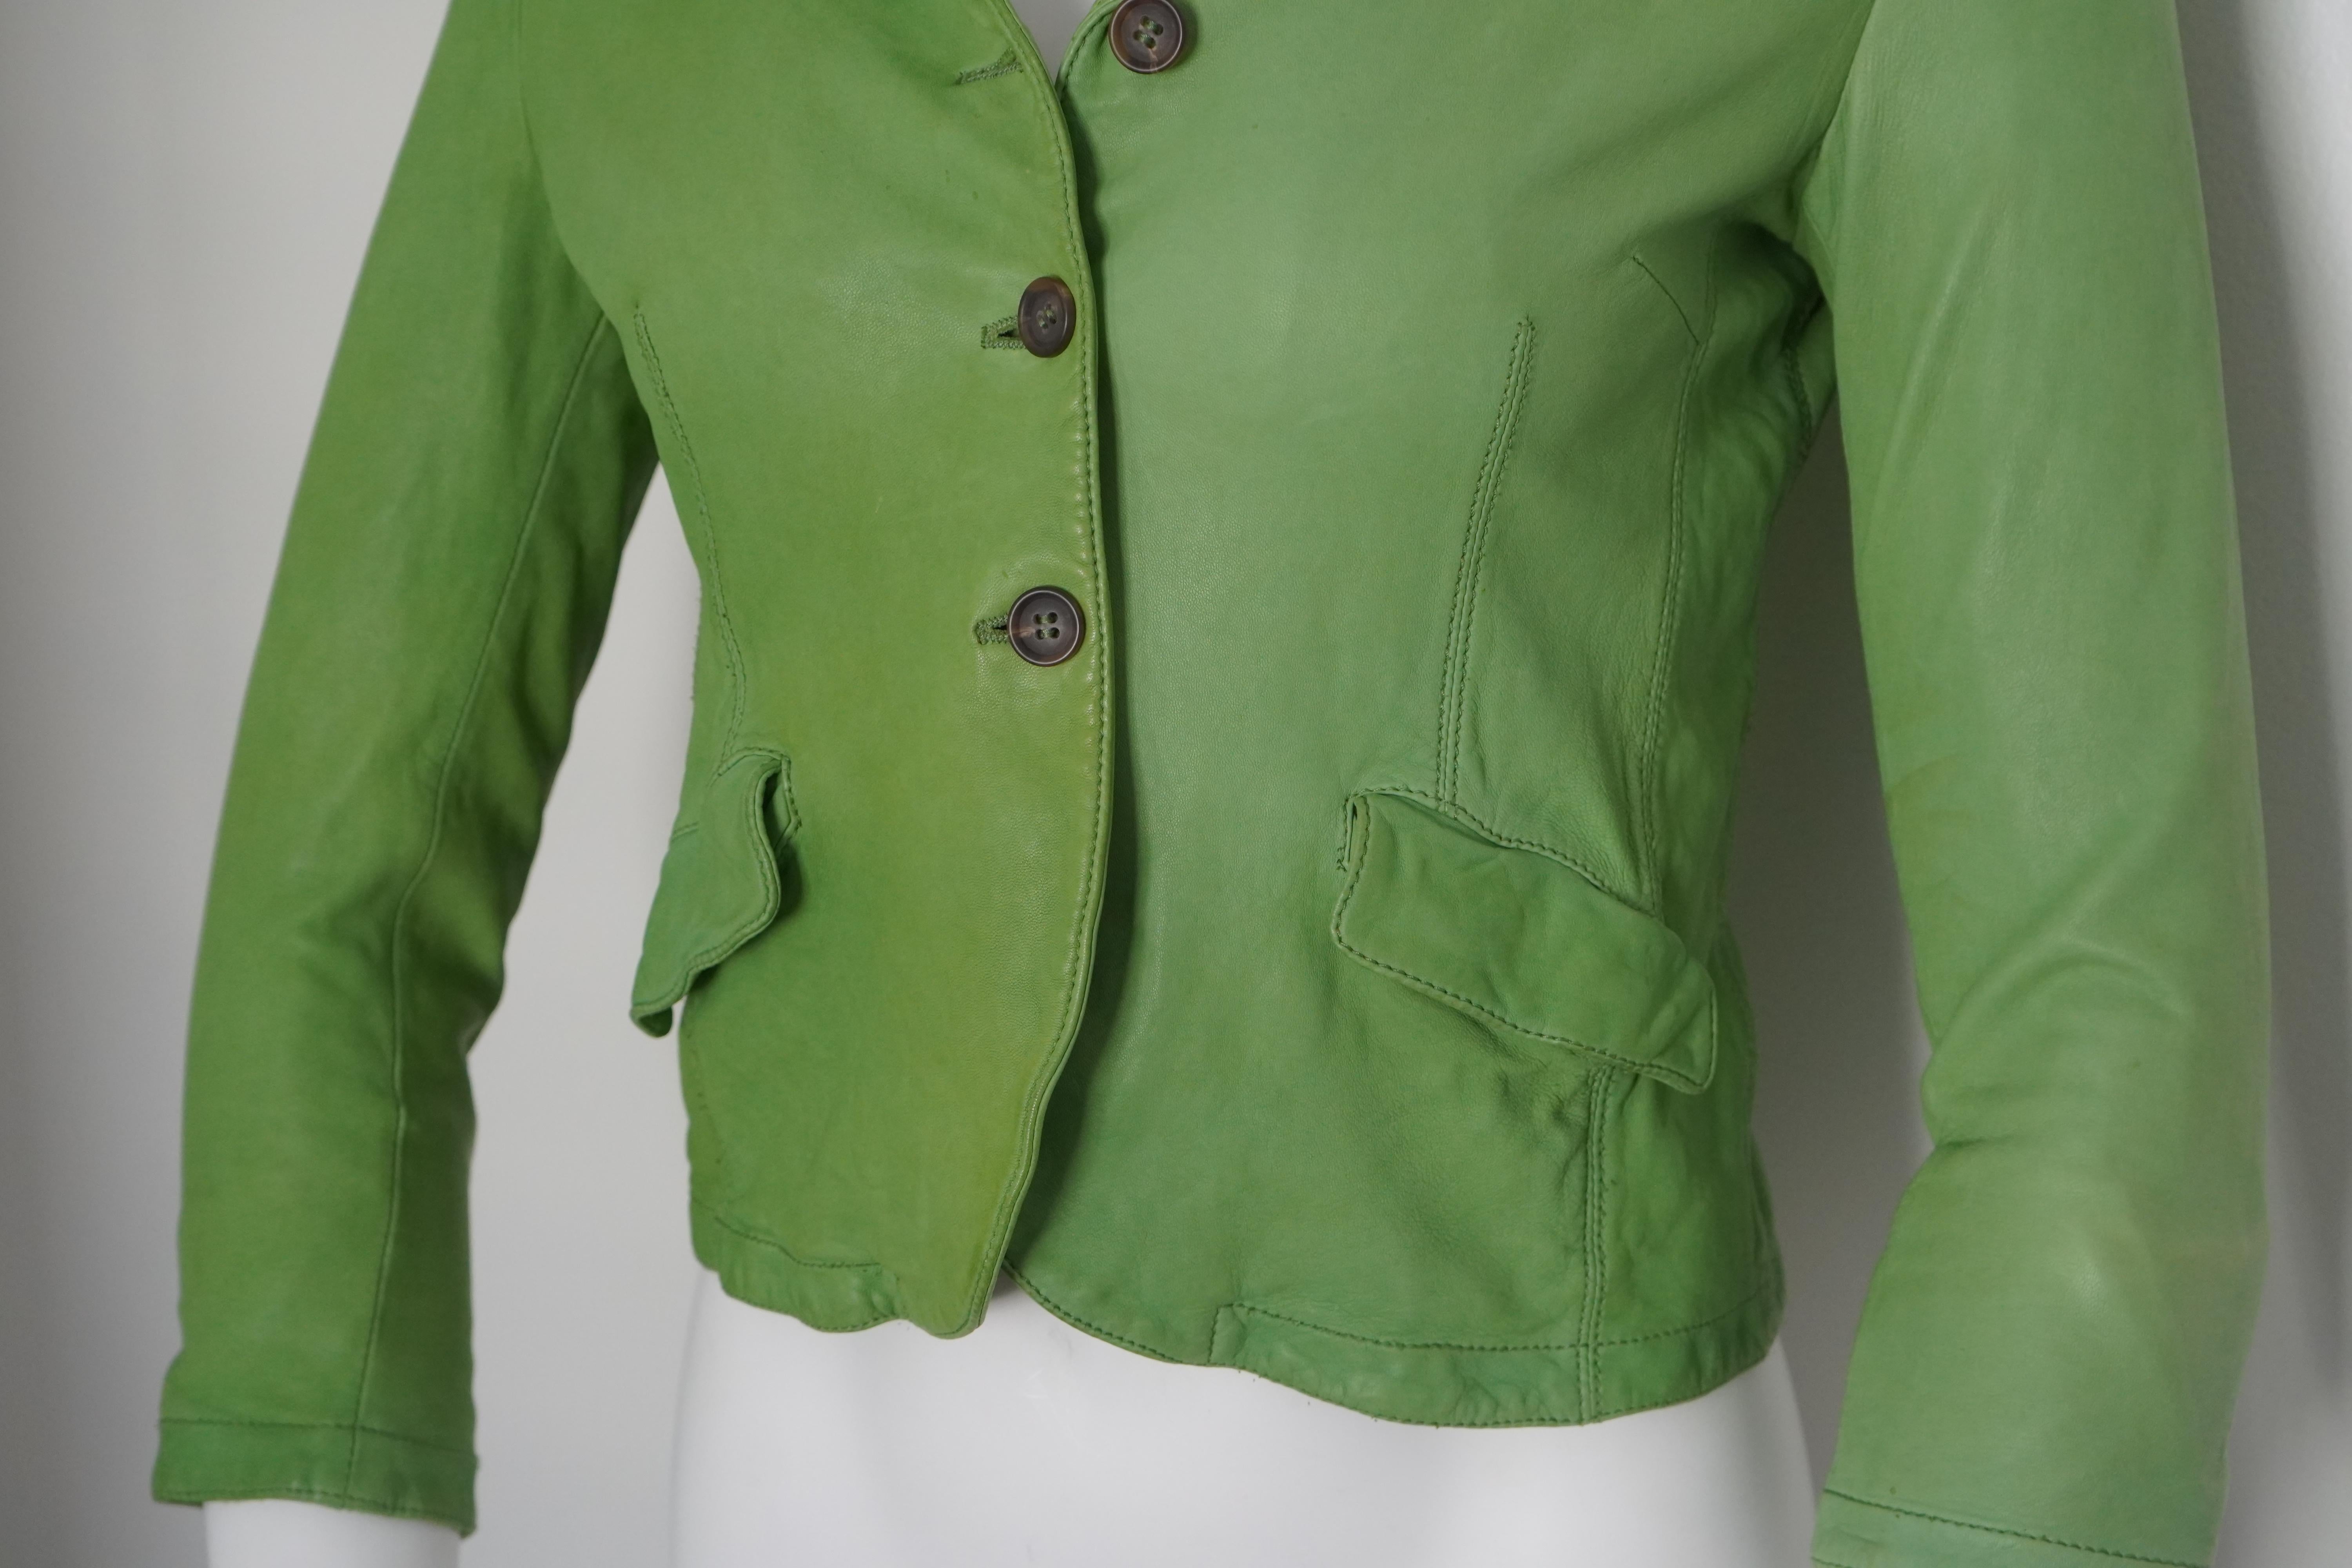 MIU MIU Green Leather Jacket
Made in Italy
Size S
3 button closure
Slightly cropped
Small hole on left arm (pictured) 